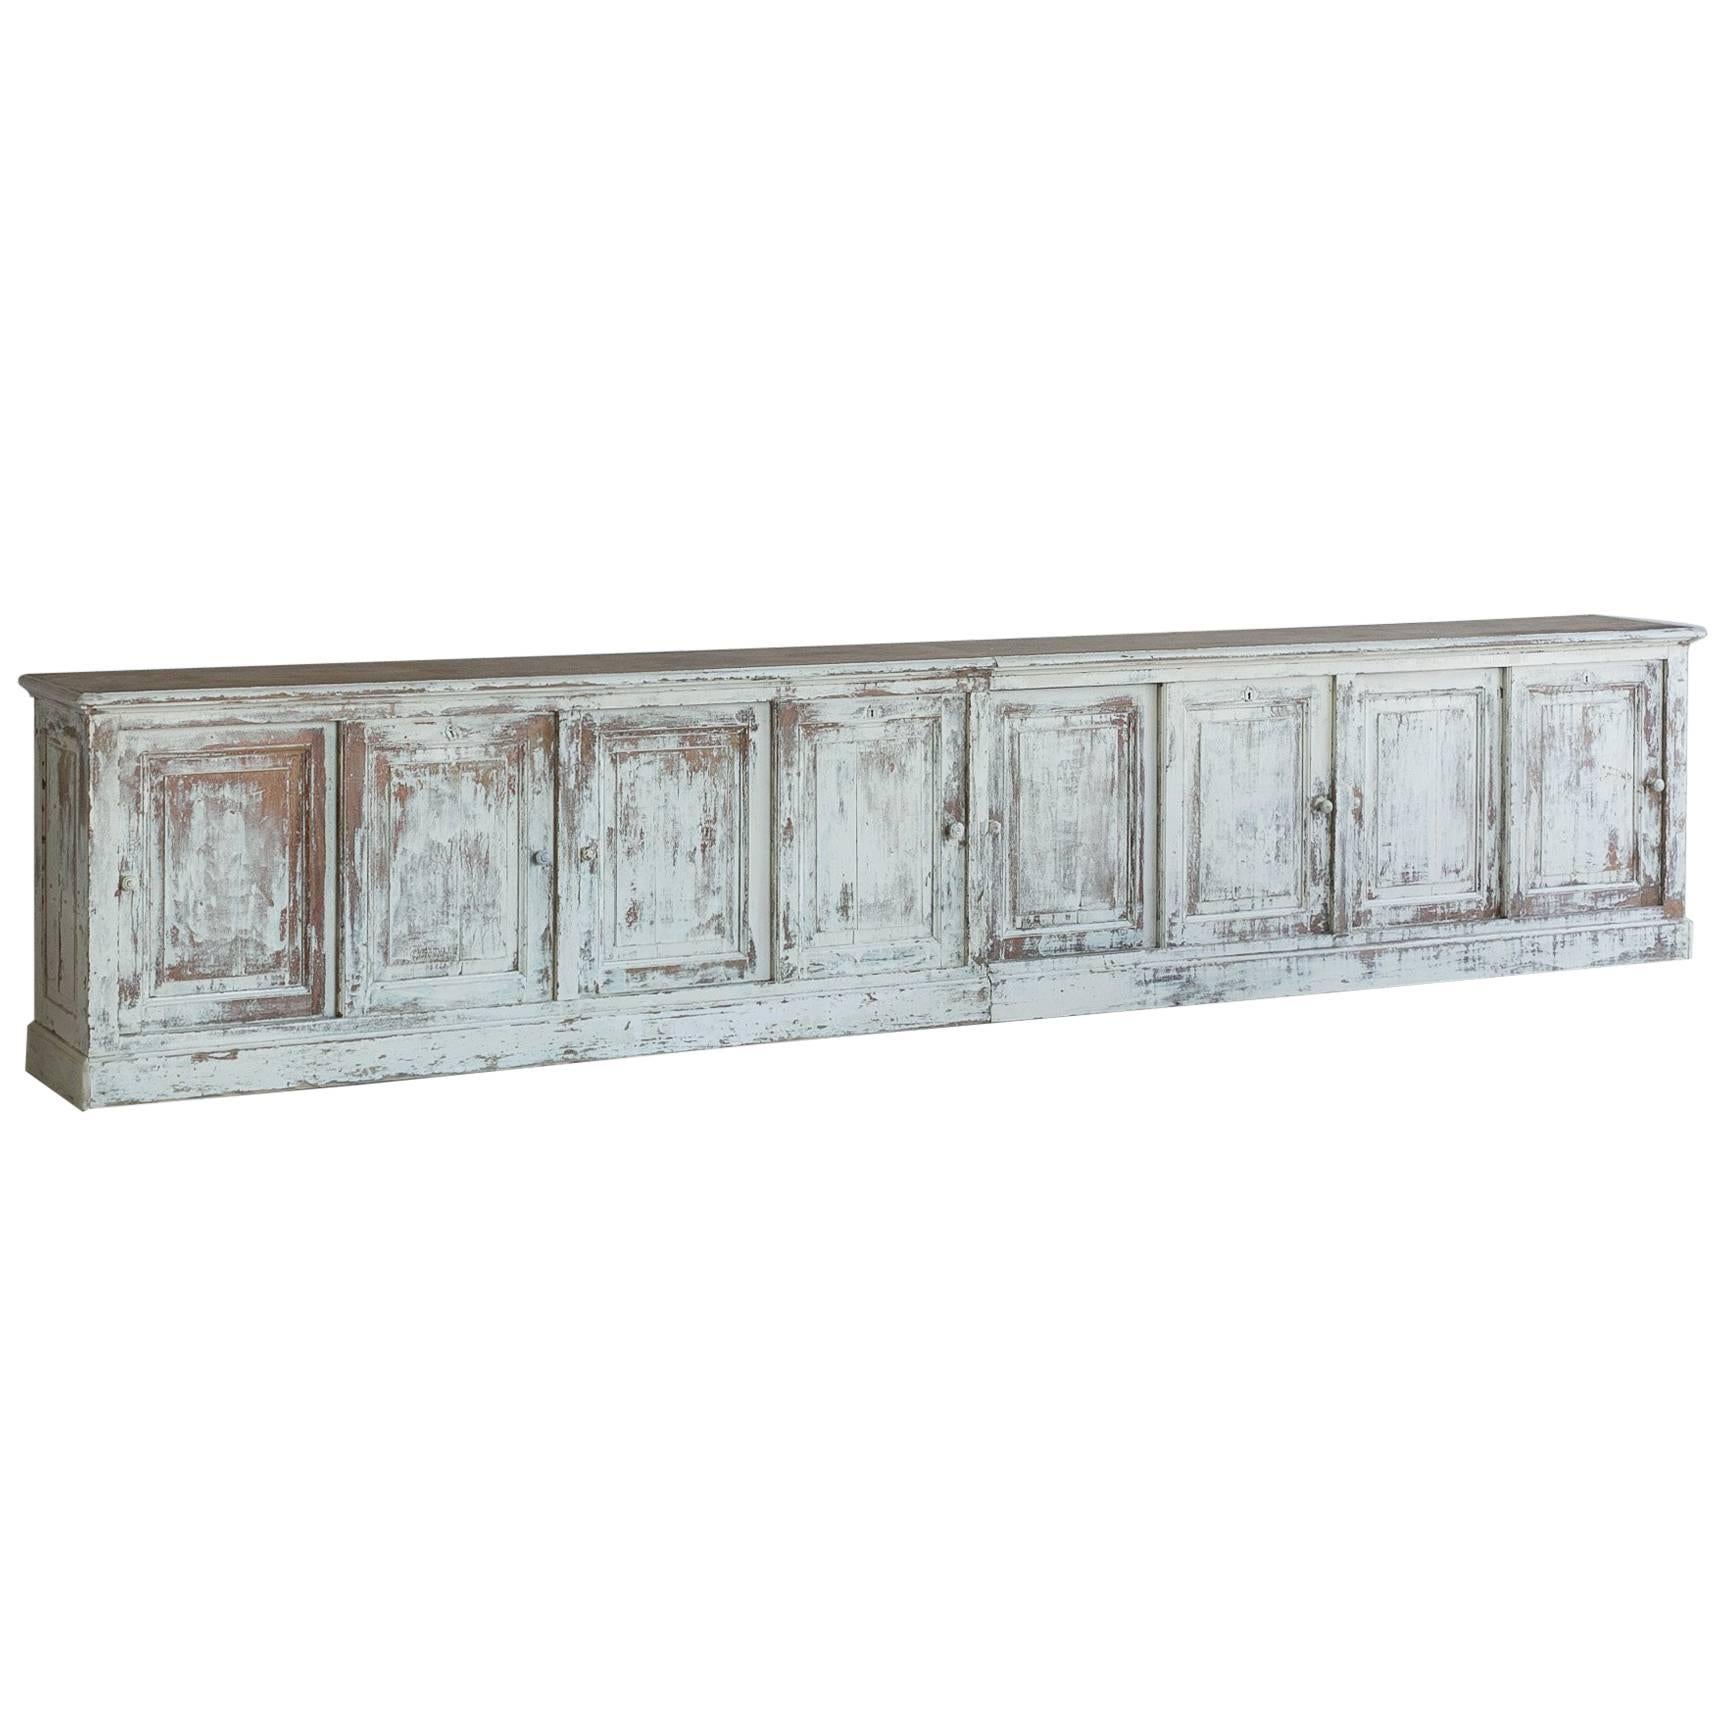 19th Century Antique White-Washed Sideboard